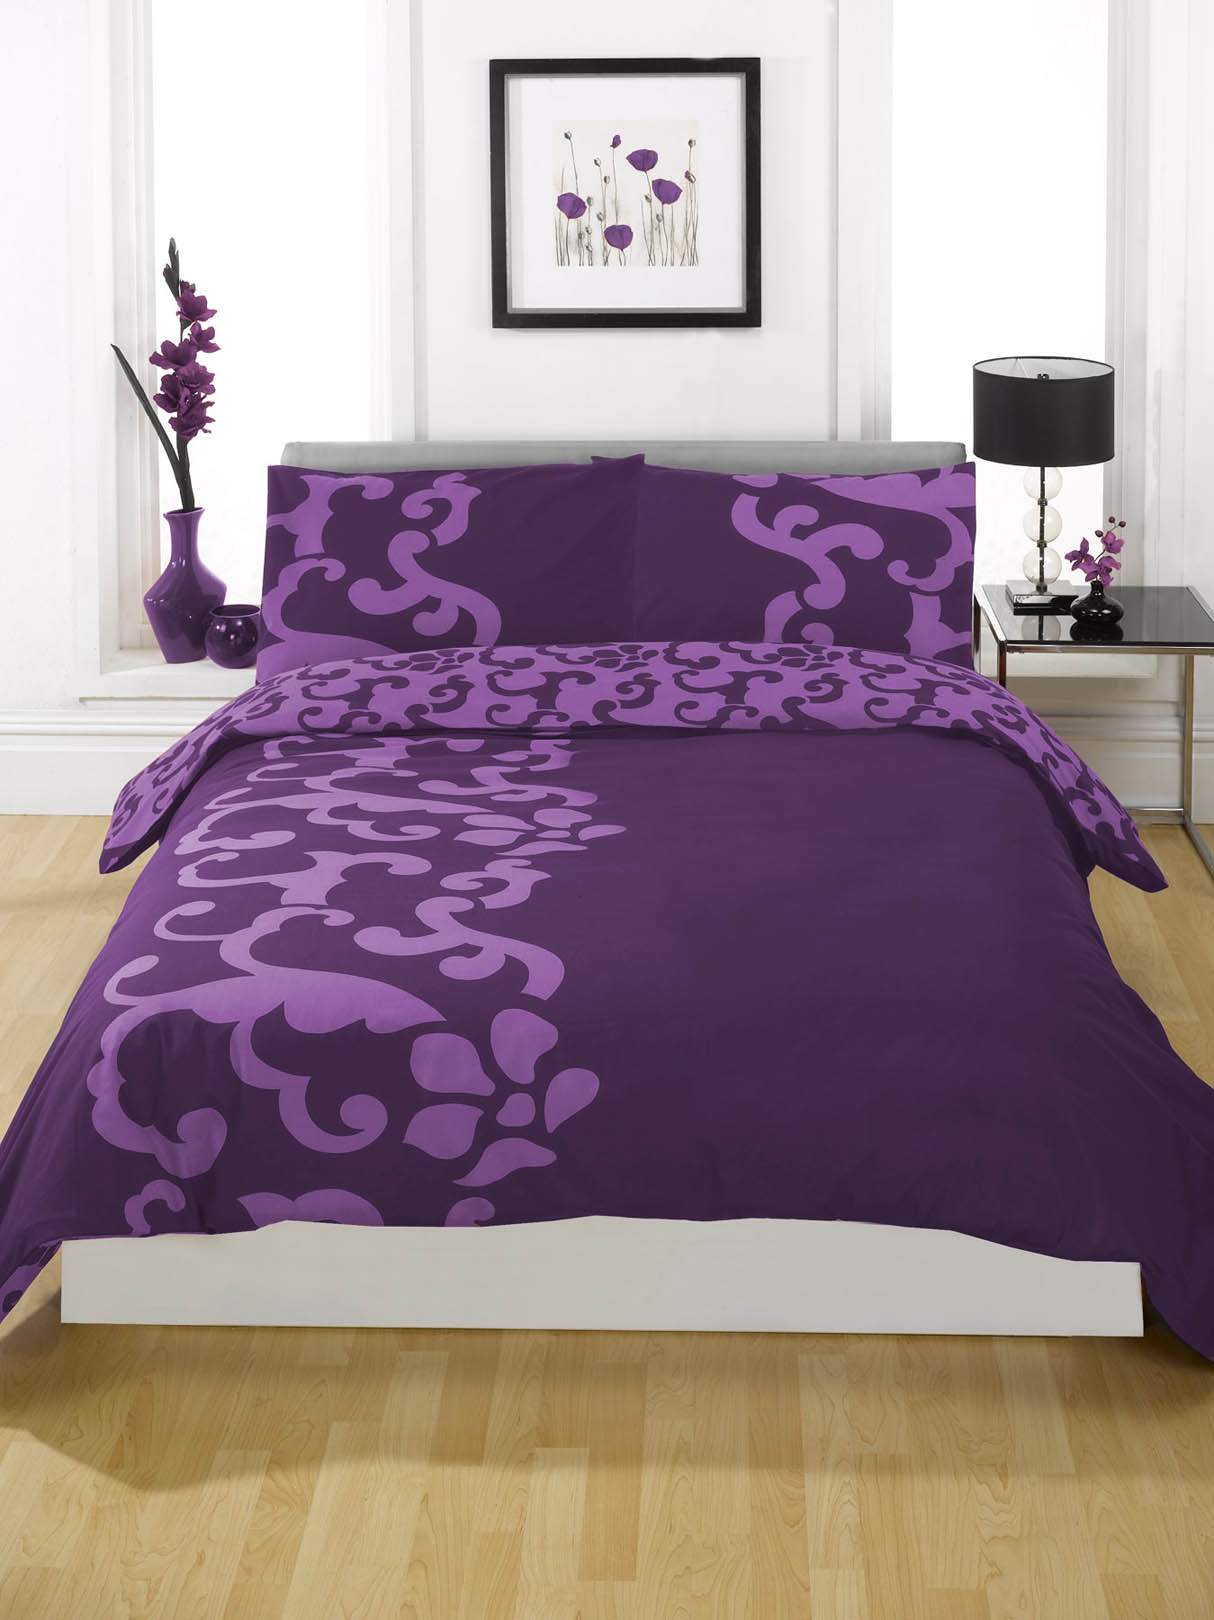 Purple Duvet Modern Elegant Purple Duvet Cover On Modern Low Profile Bed Glossy Dark Table Lamp On Glass Bedside Table Artistic Painting Bedroom Comfortable Purple Duvet Covers For Your Beautiful Bedroom Sets